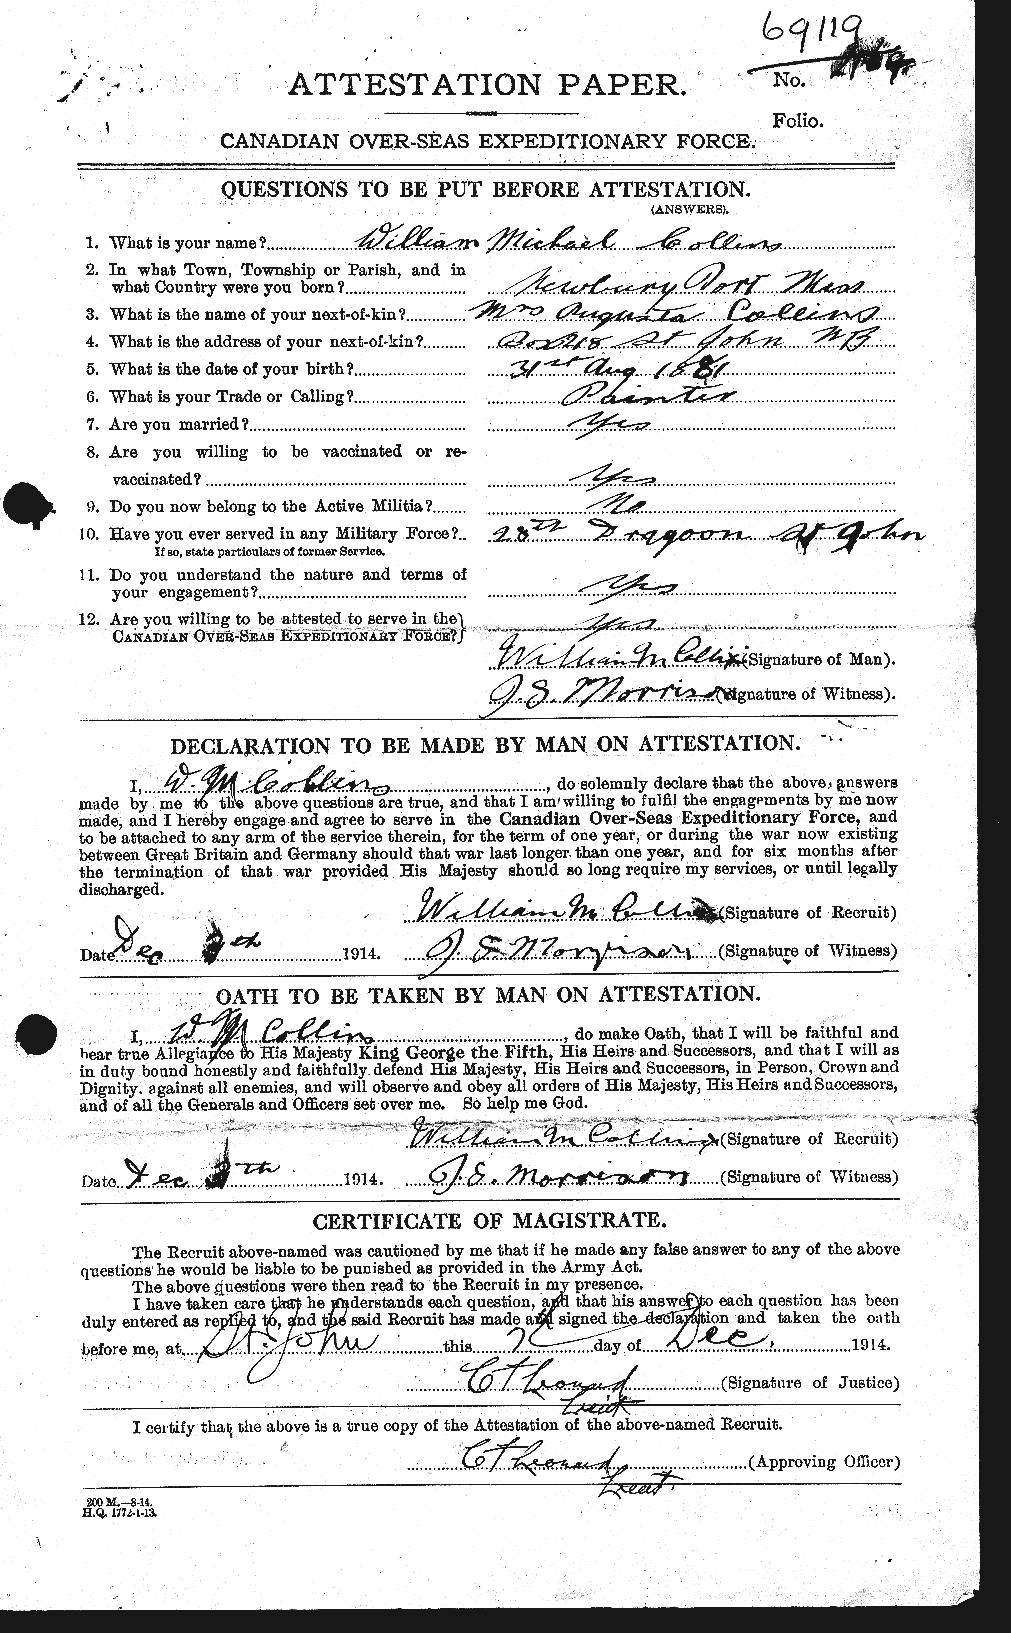 Personnel Records of the First World War - CEF 068504a